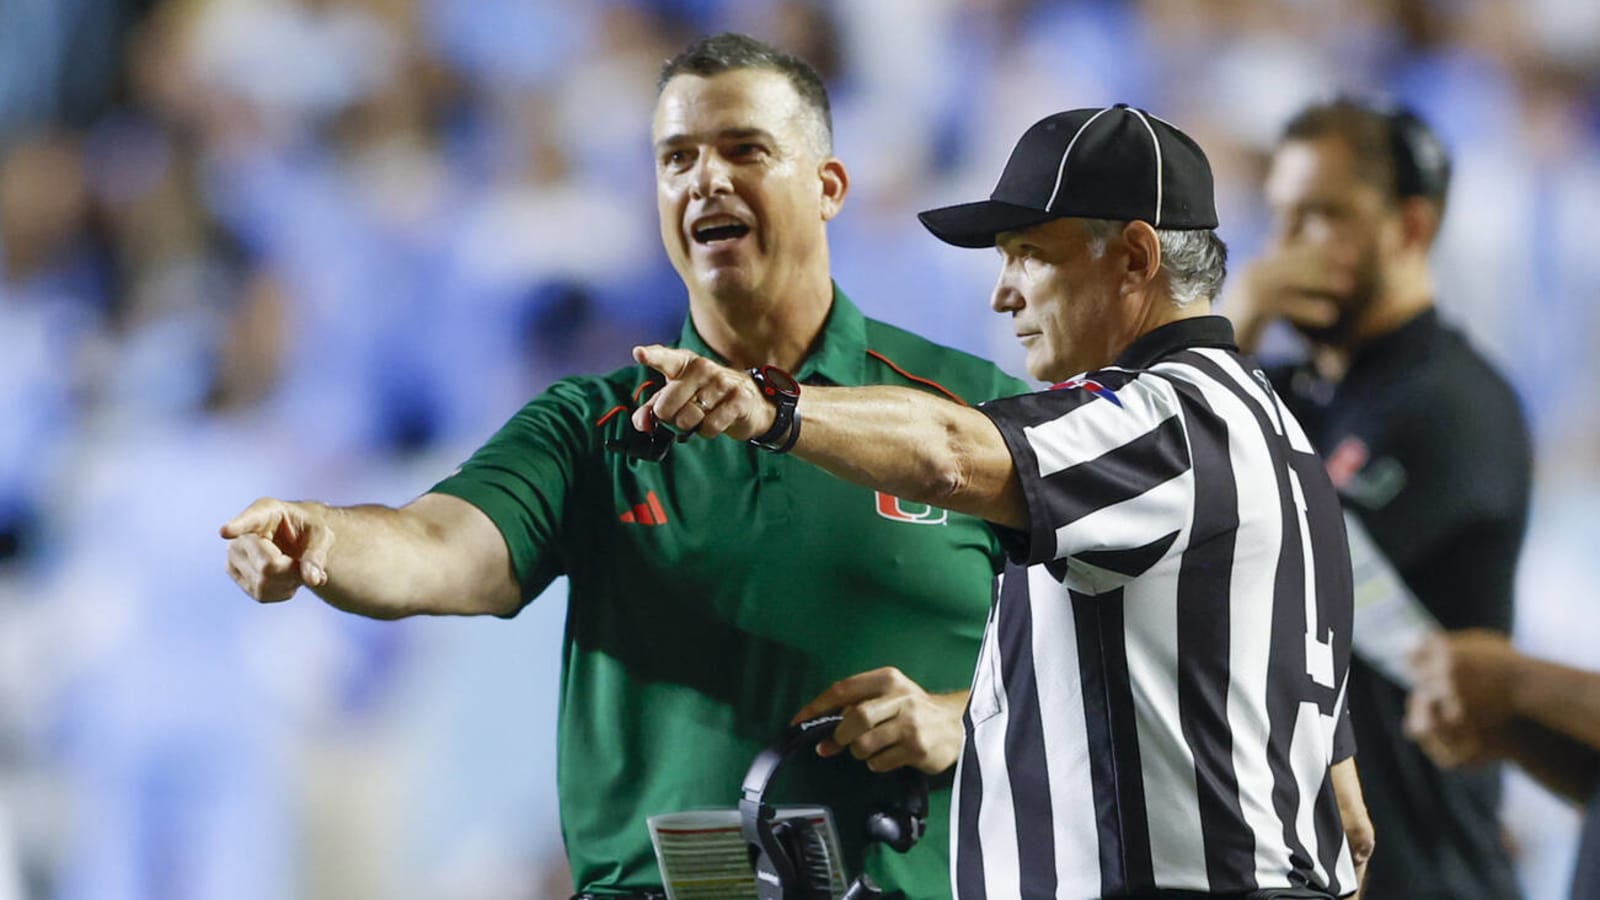 Watch: Miami DC runs onto the field screaming, gifts North Carolina a first down